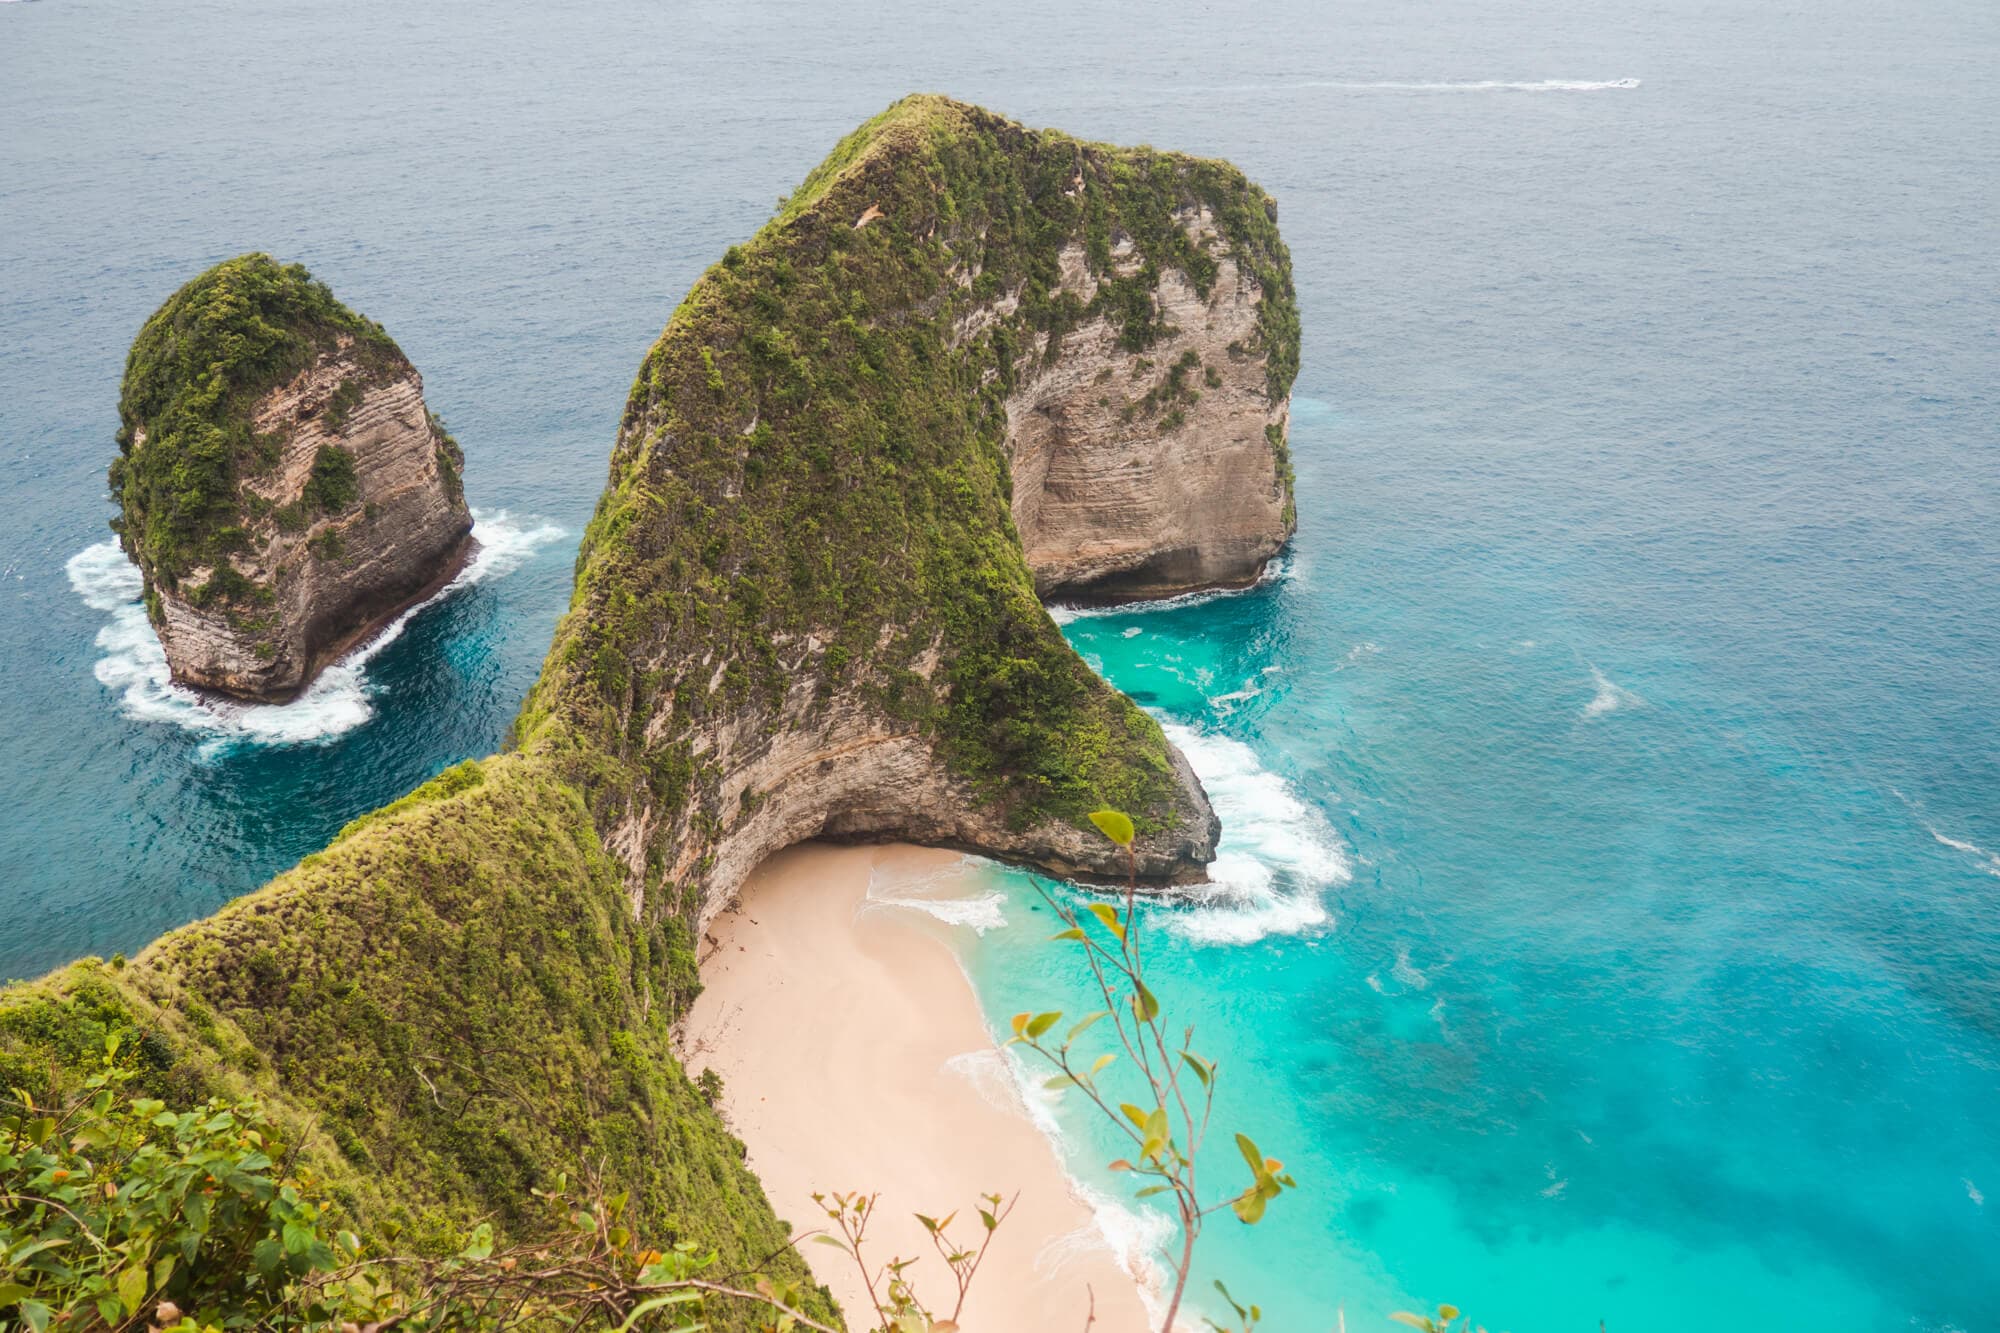 Kelingking Beach, one of the stops on our snorkeling trip to Nusa Penida